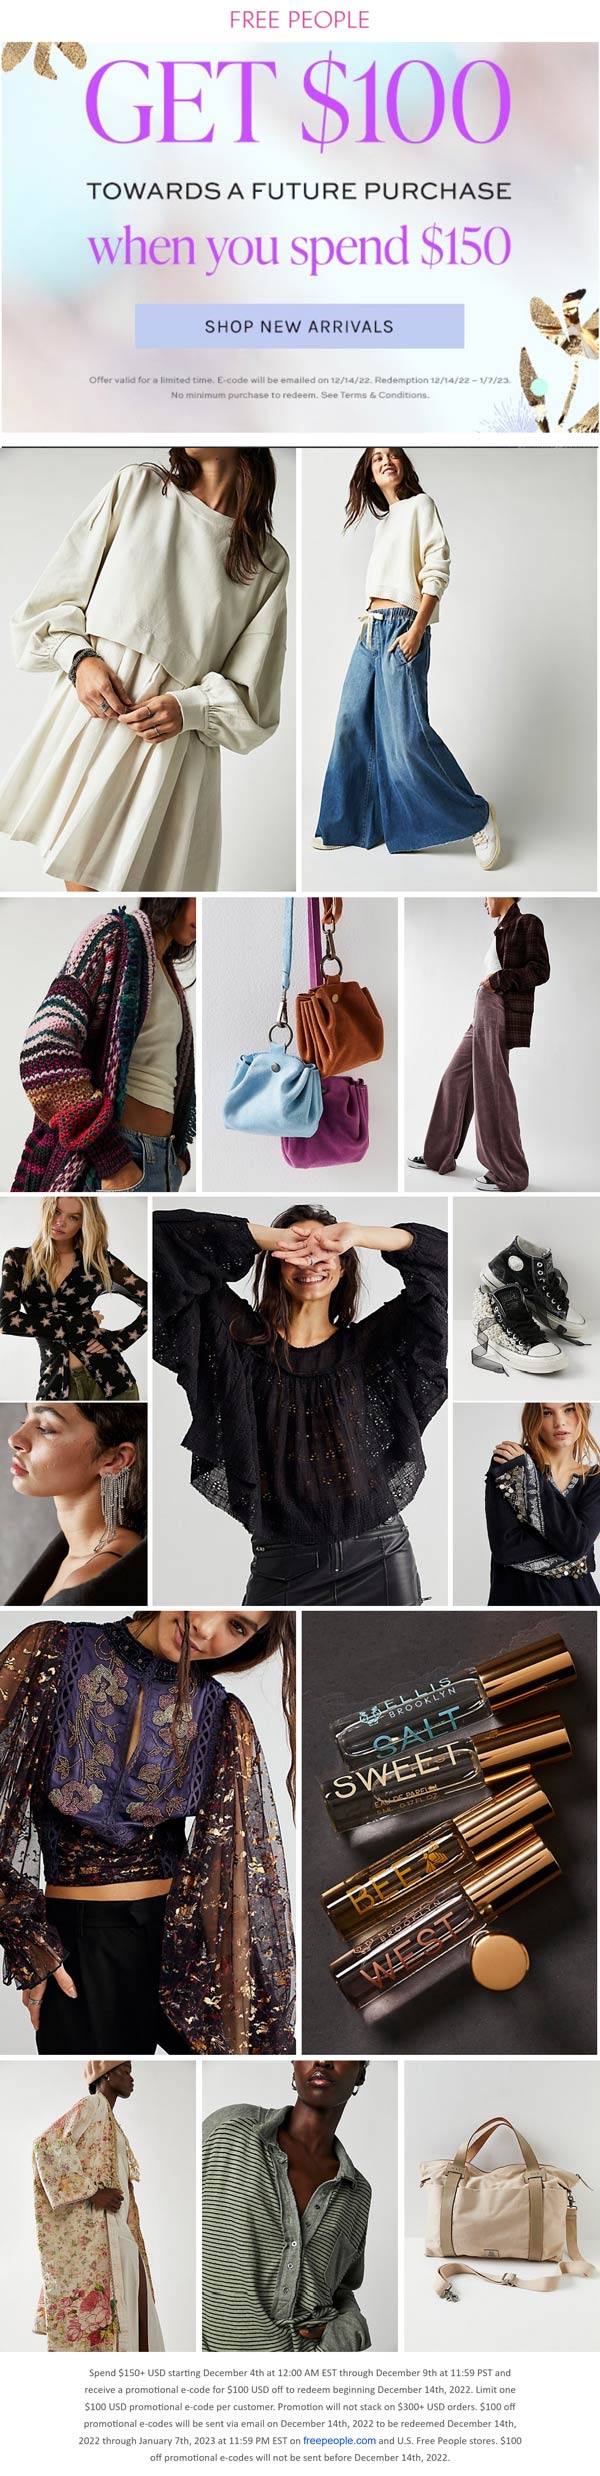 Free People stores Coupon  $100 future e-code on $150 spent at Free People #freepeople 